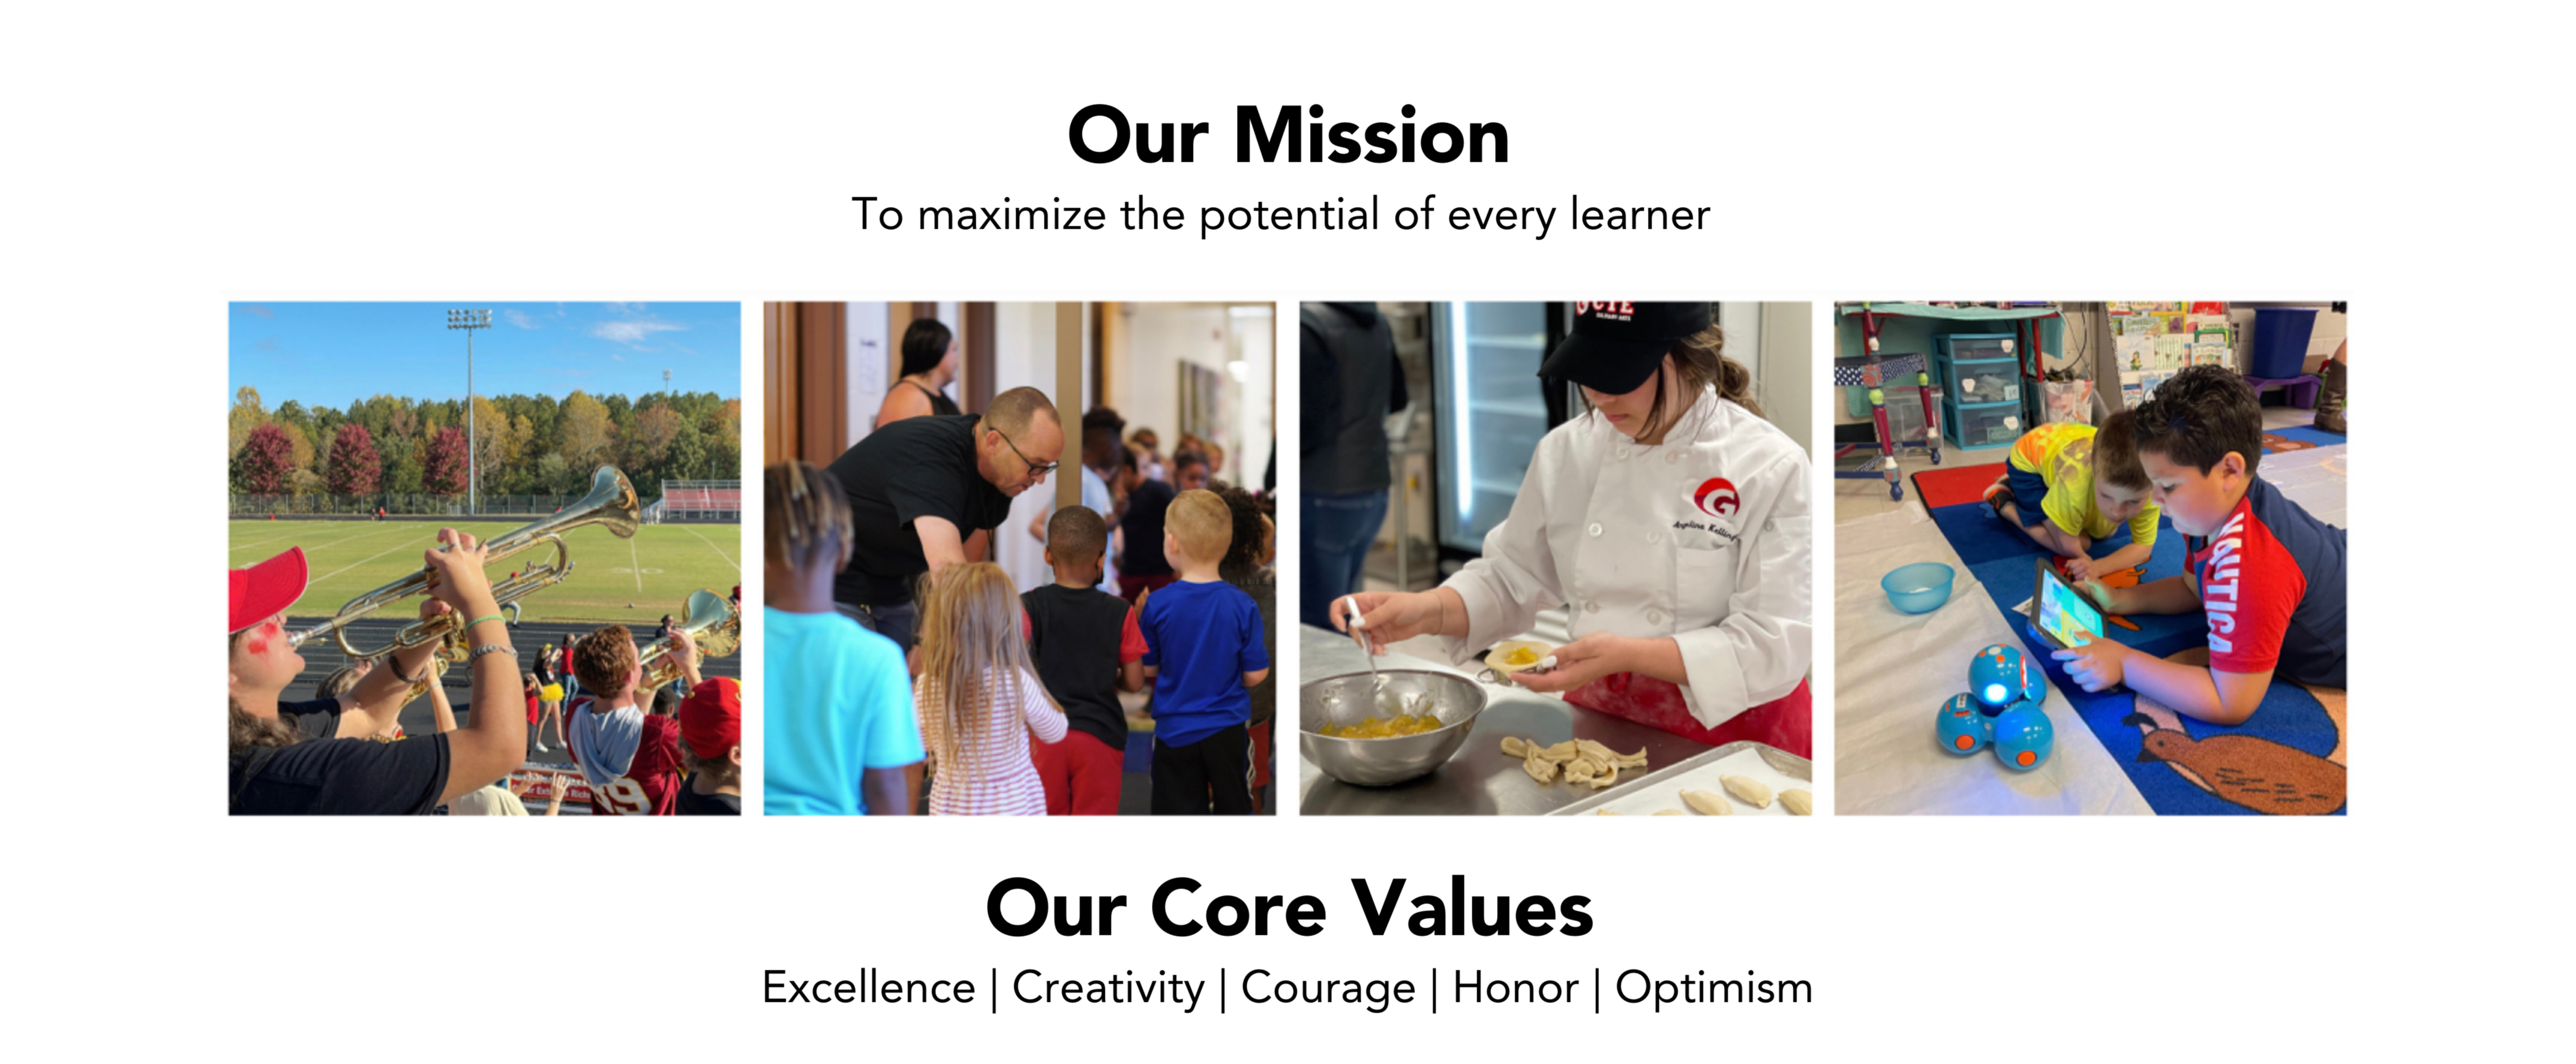 Our Mission - To maximize the potential of every learner. Four pictures across the screen - first picture: high school band playing at the GHS stadium, second picture: elementary PE teacher dismissing class, third picture:  high school culinary arts student making dumplings, fourth picture: two students coding a robot using iPad. At the bottom the image says Our Core Values: Excellence, Creativity, Courage, Honor, Optimism